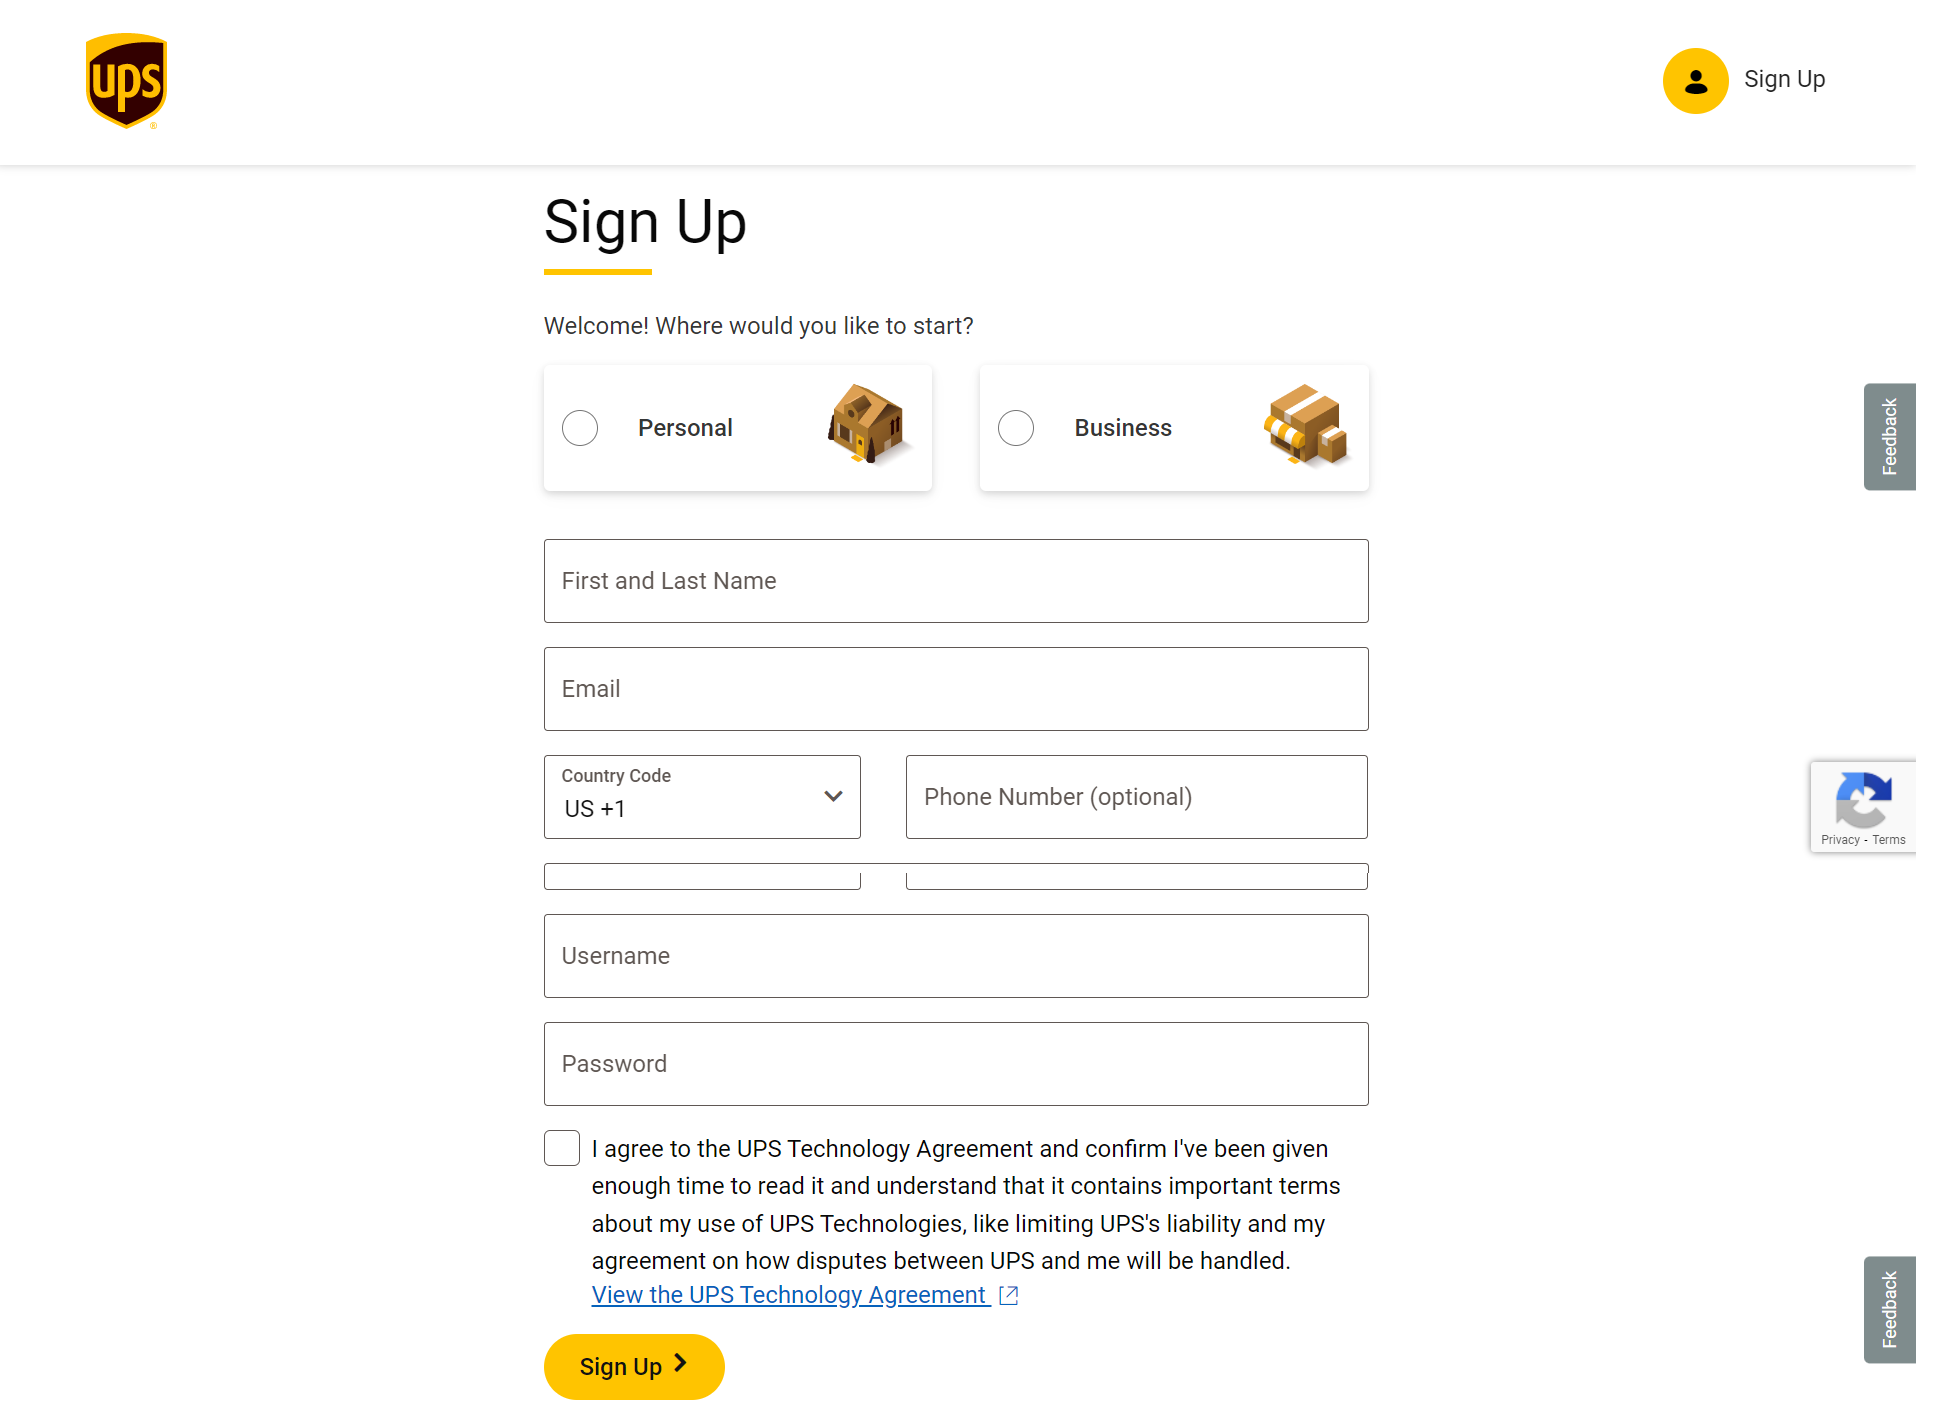 How to Get a UPS Account Number